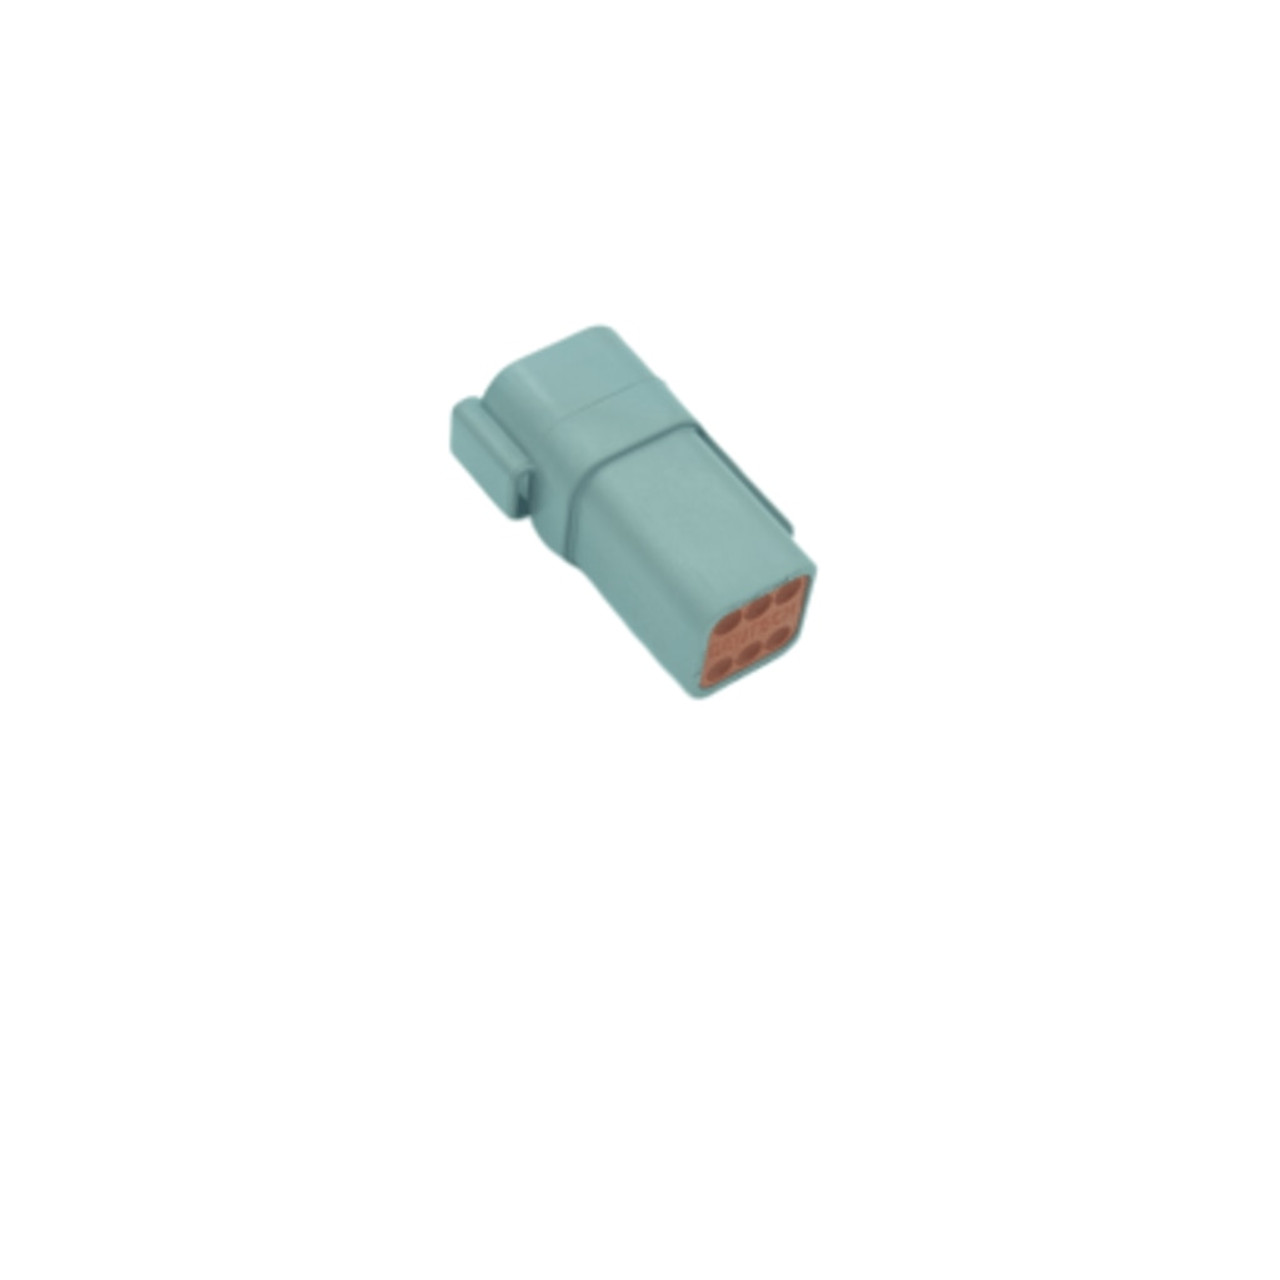 6 pin DT receptacle